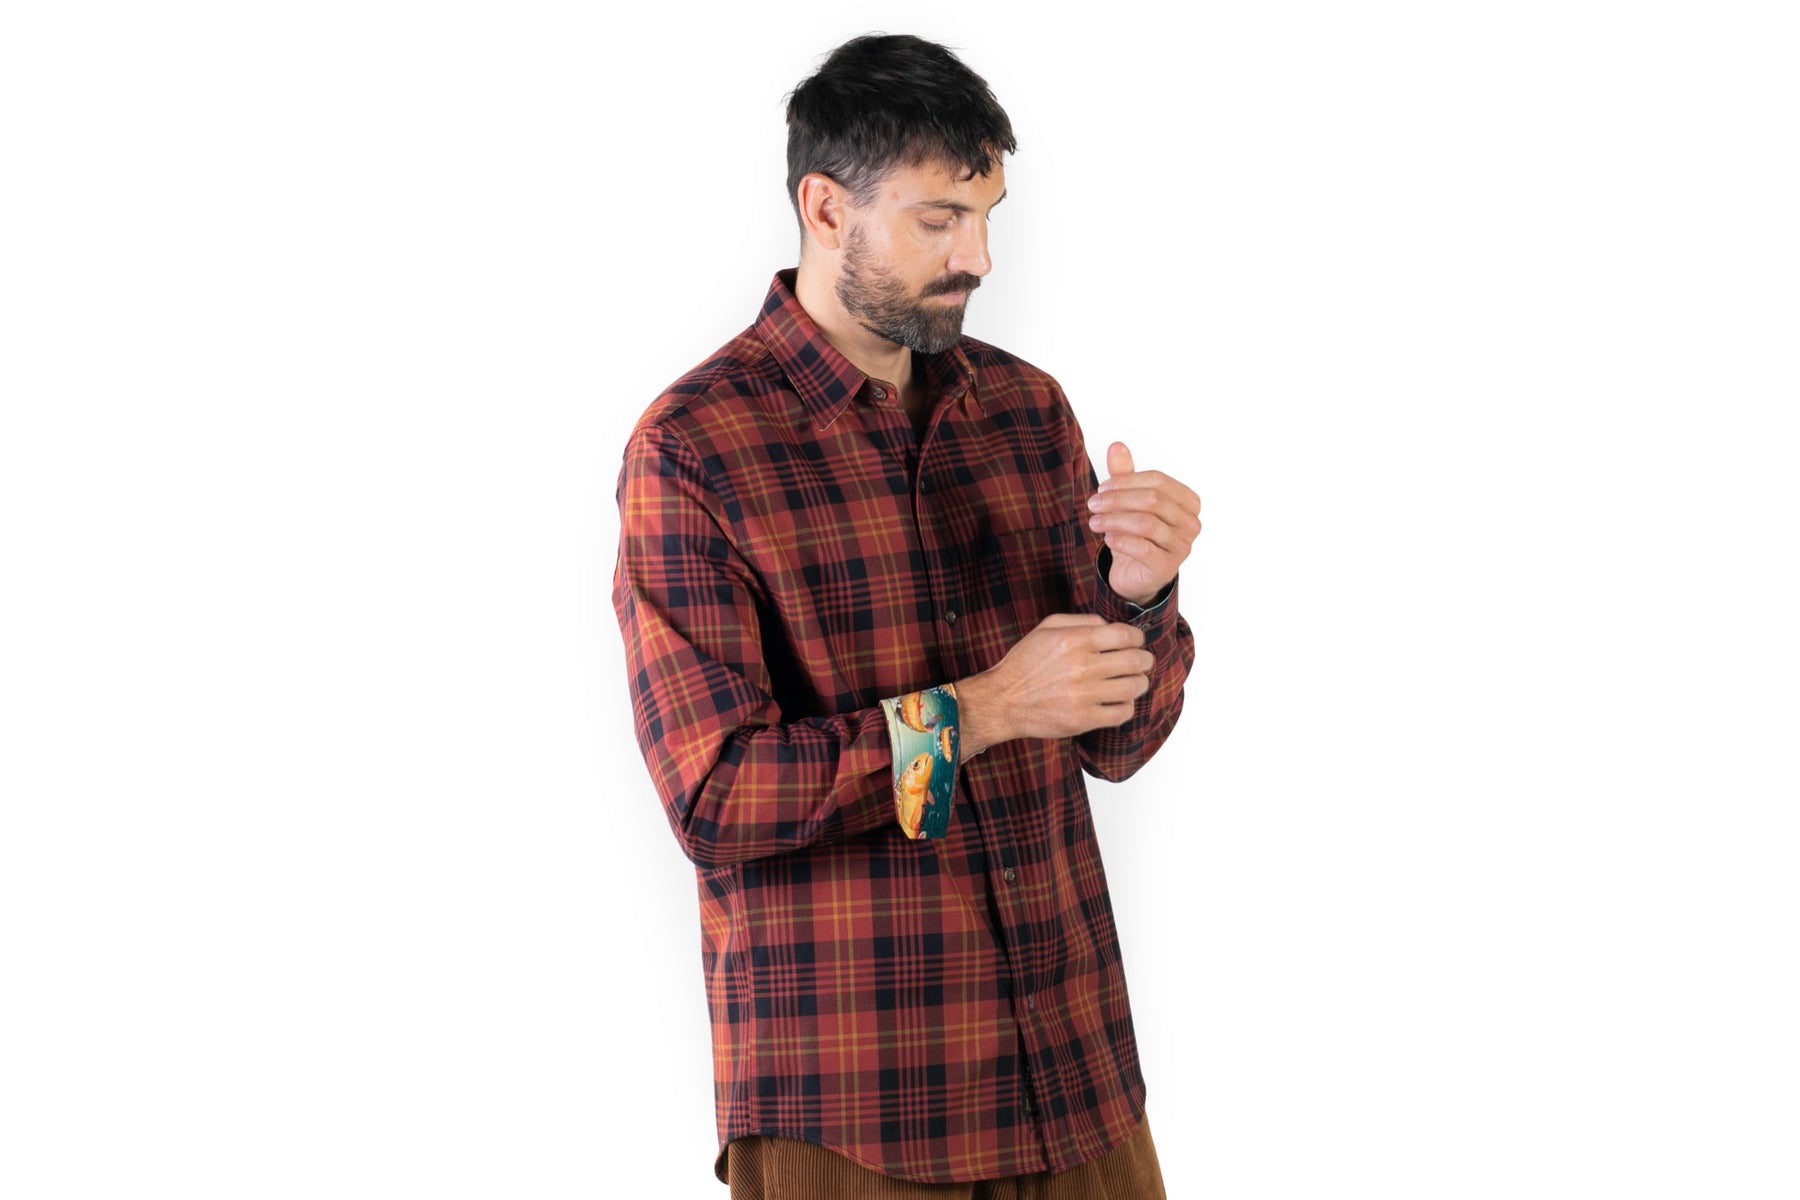 Local Flannel Shirt Maker 'Pladra' Opens 1st Store In Hayes Valley